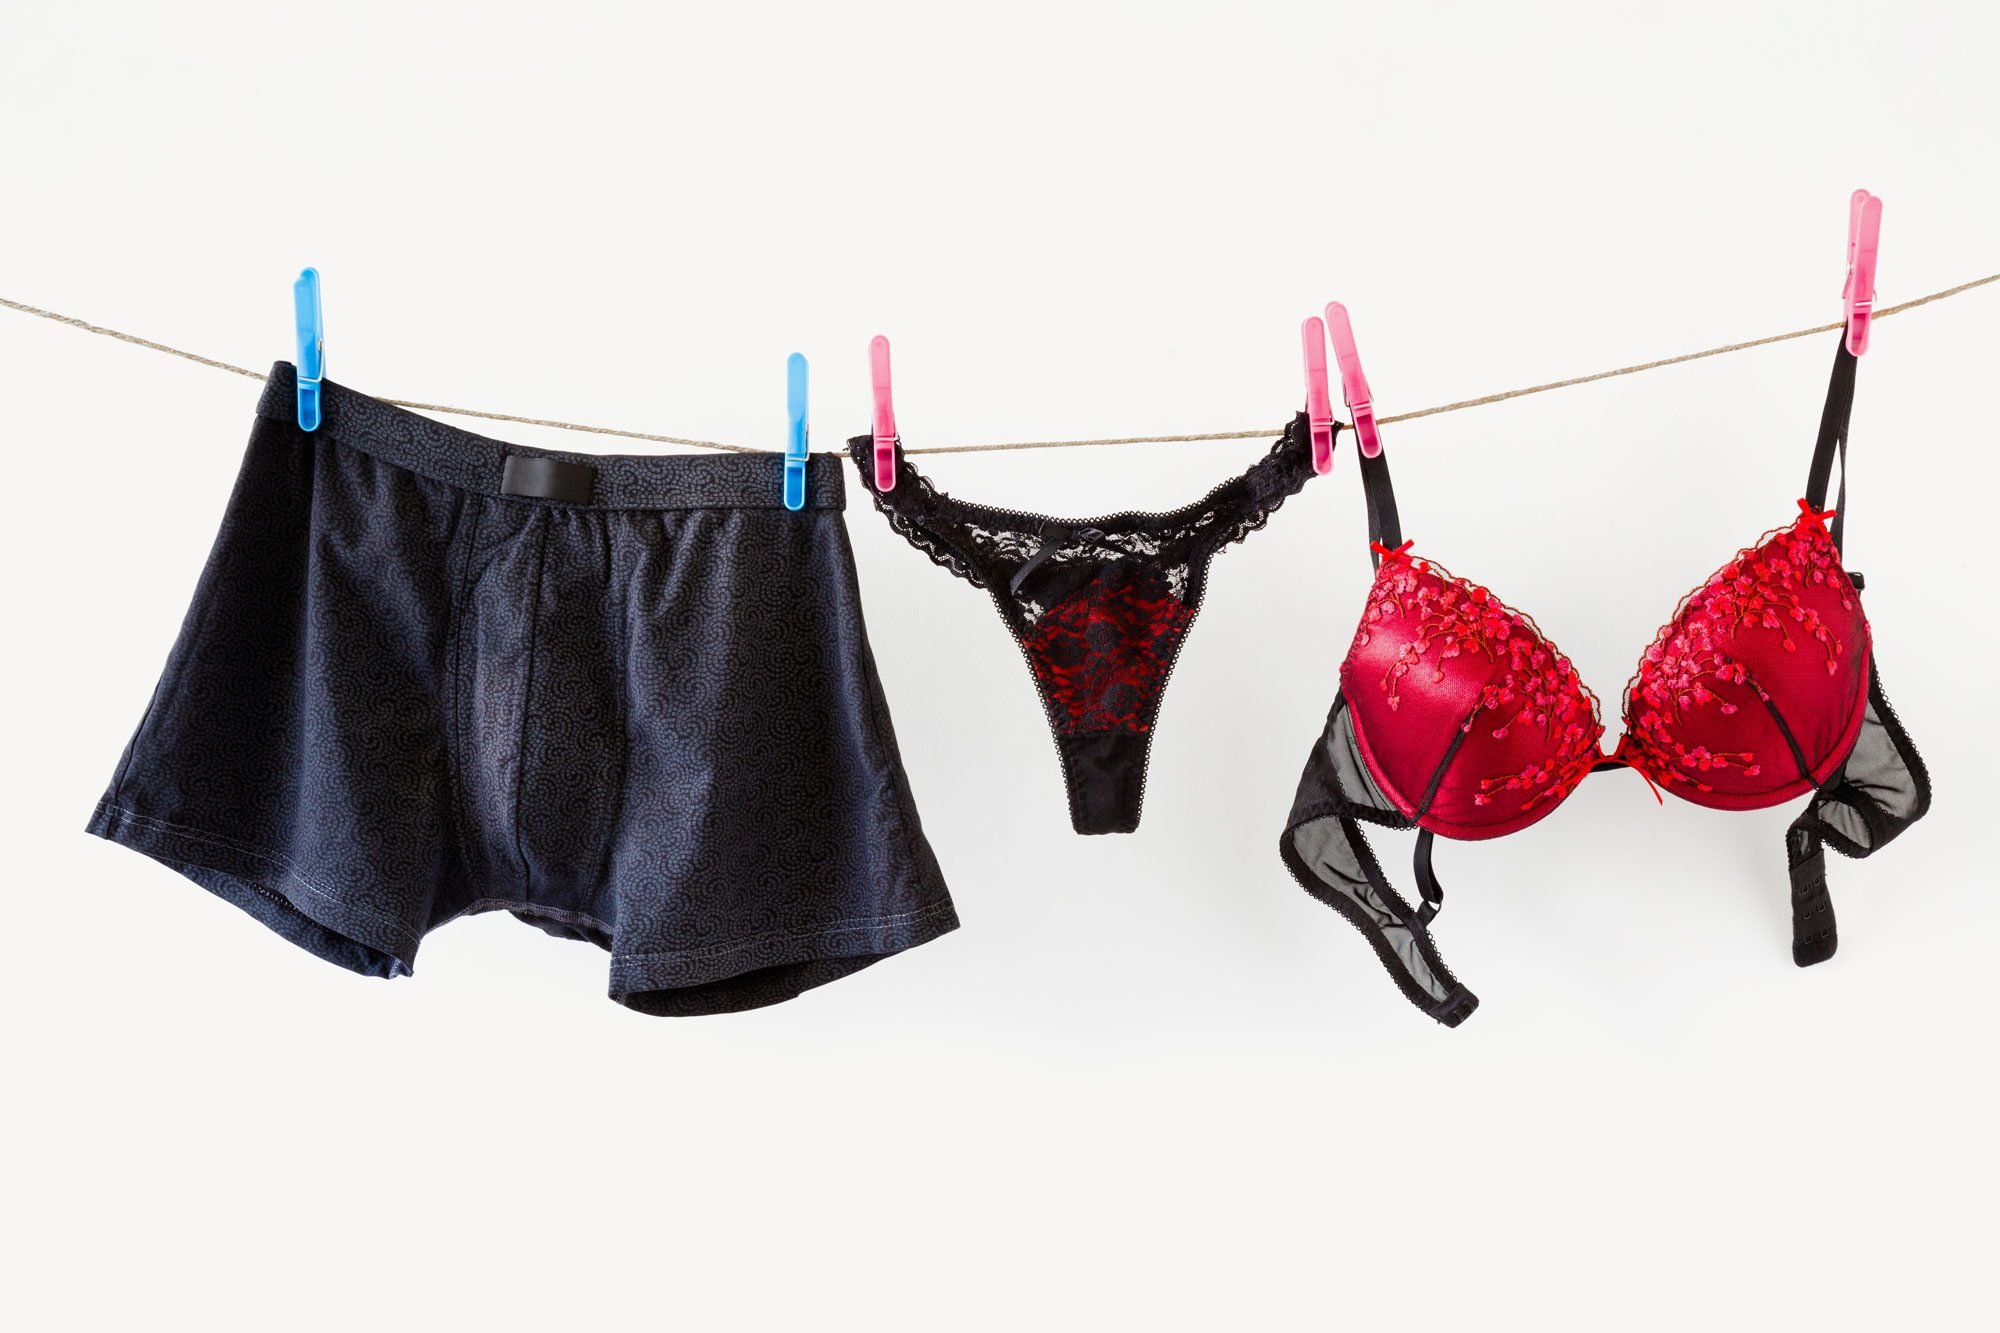 5 Tips For Selling Your Used Panties